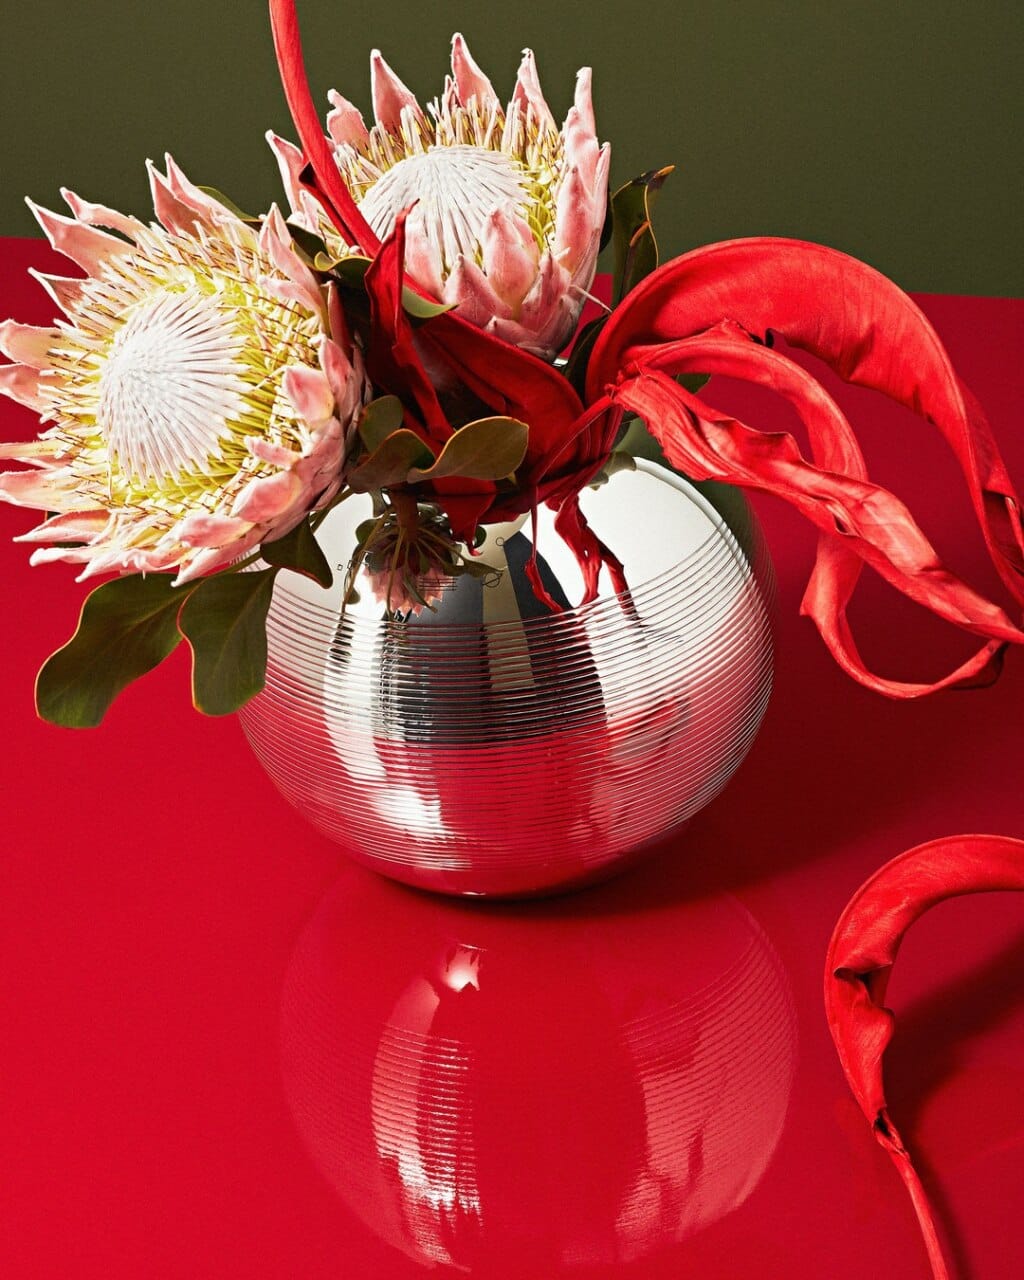 Vase in silver plated from Pétanque collection from Puiforcat photographed on a red table in front of a green wall with flowers in the vase